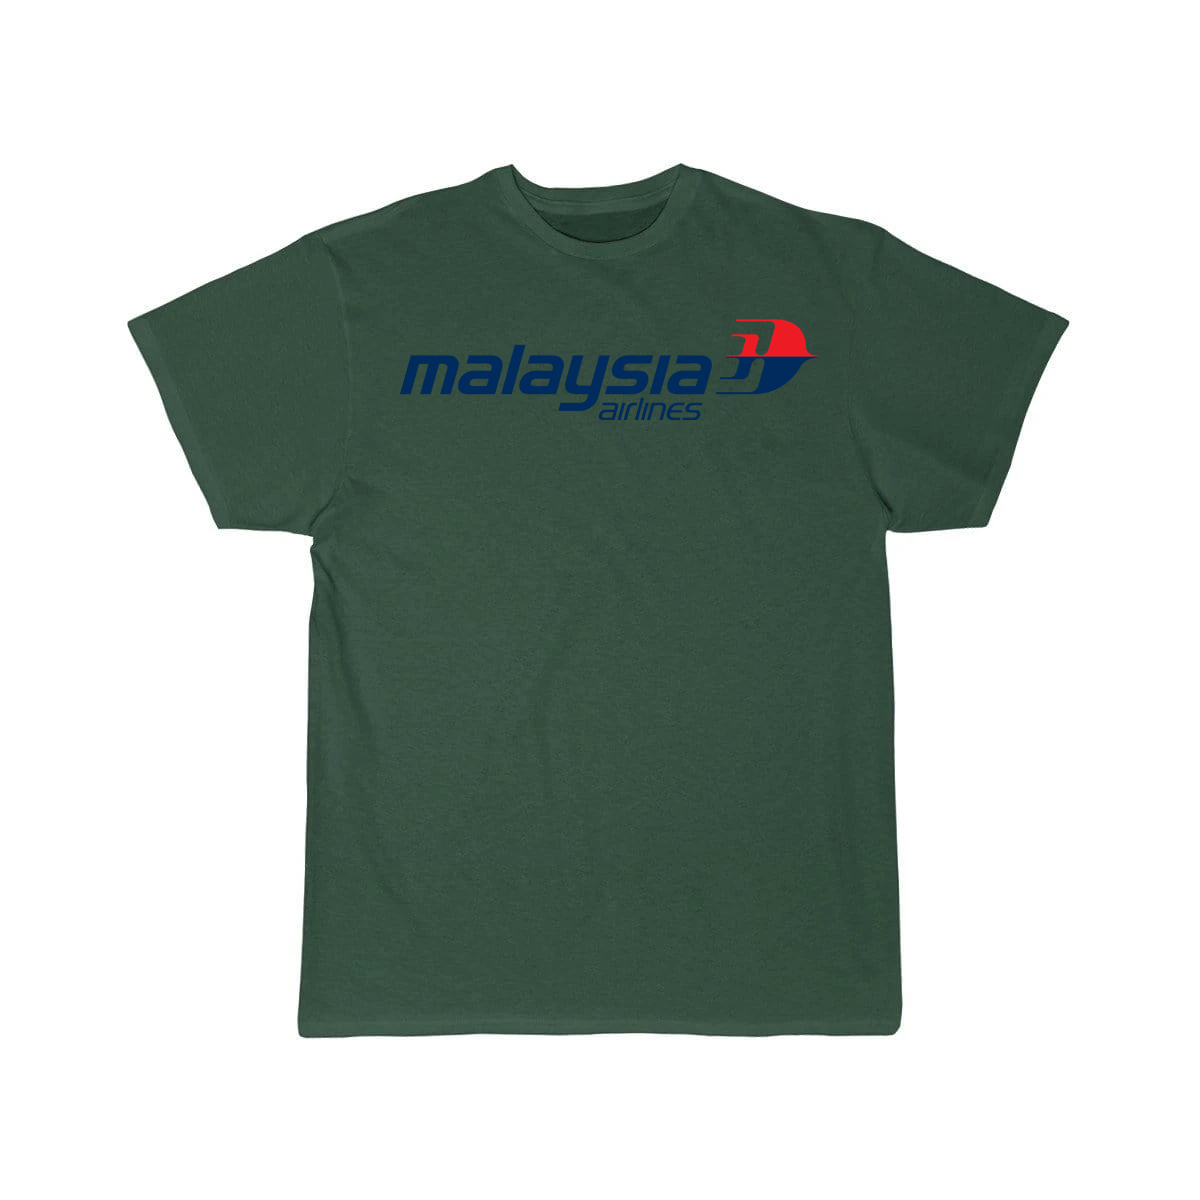 MALAYSIA AIRLINE T-SHIRT